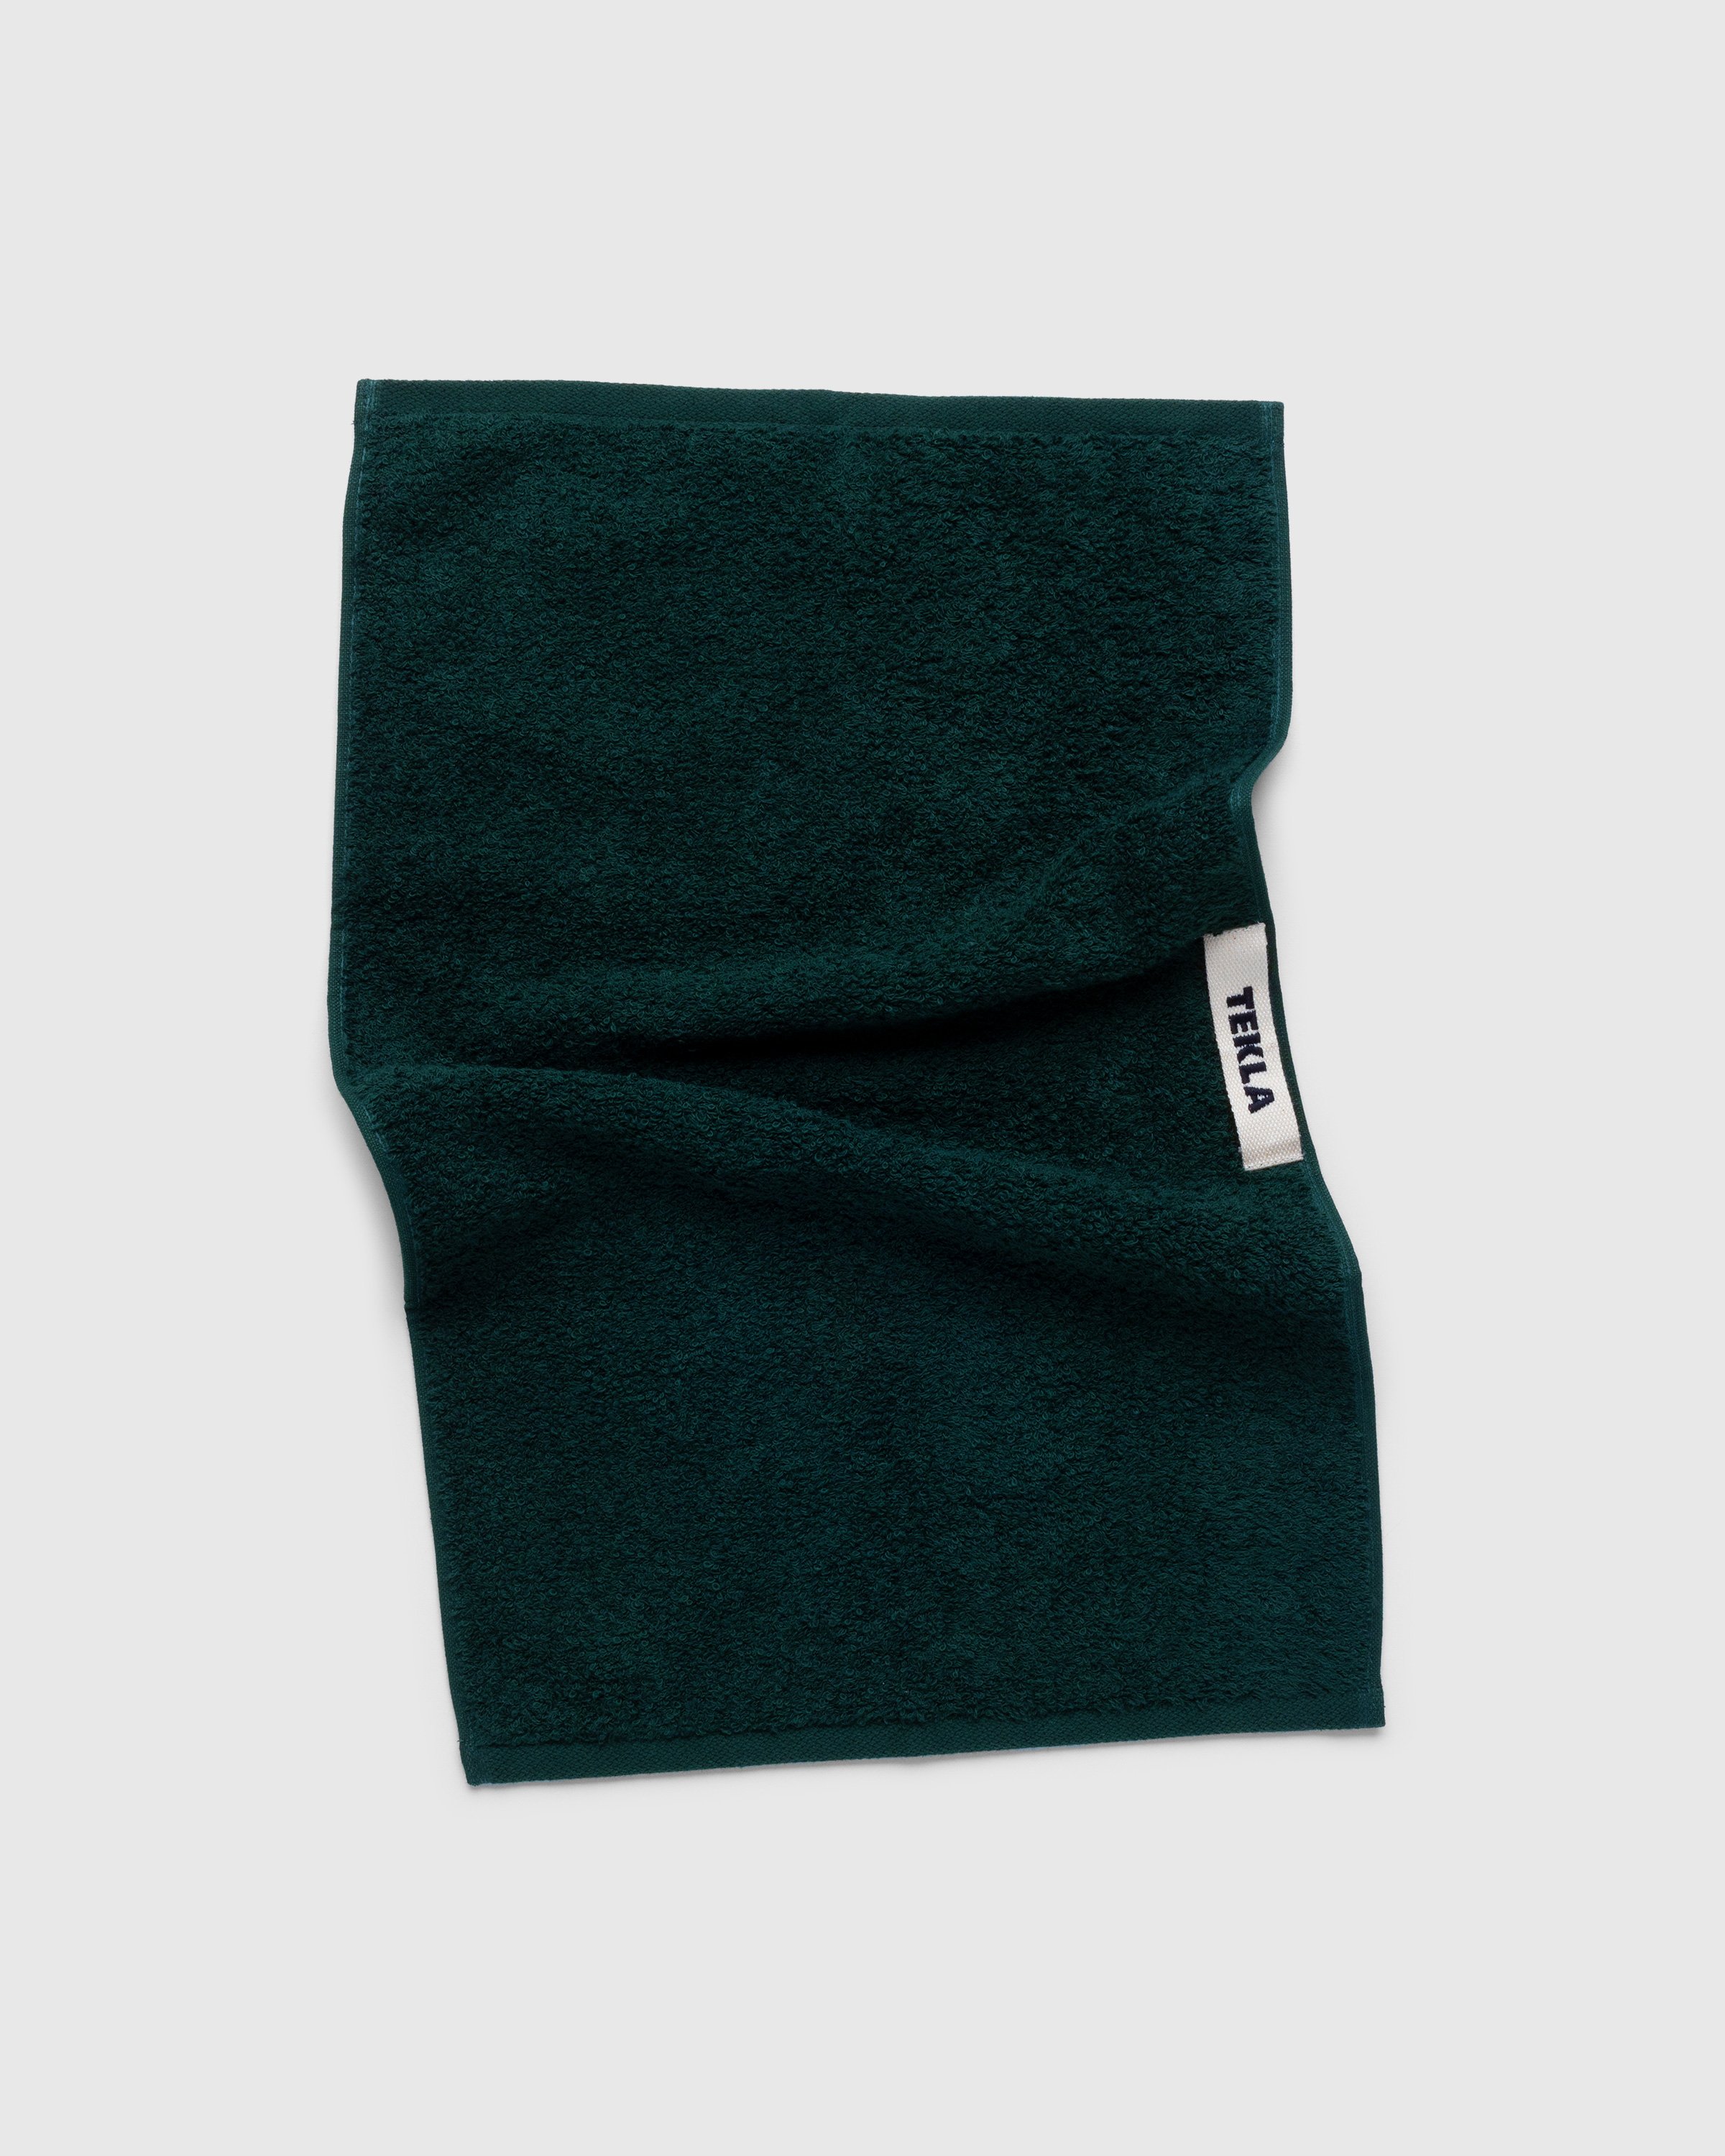 Tekla - Hand Towel Forest Green - Lifestyle - Green - Image 1